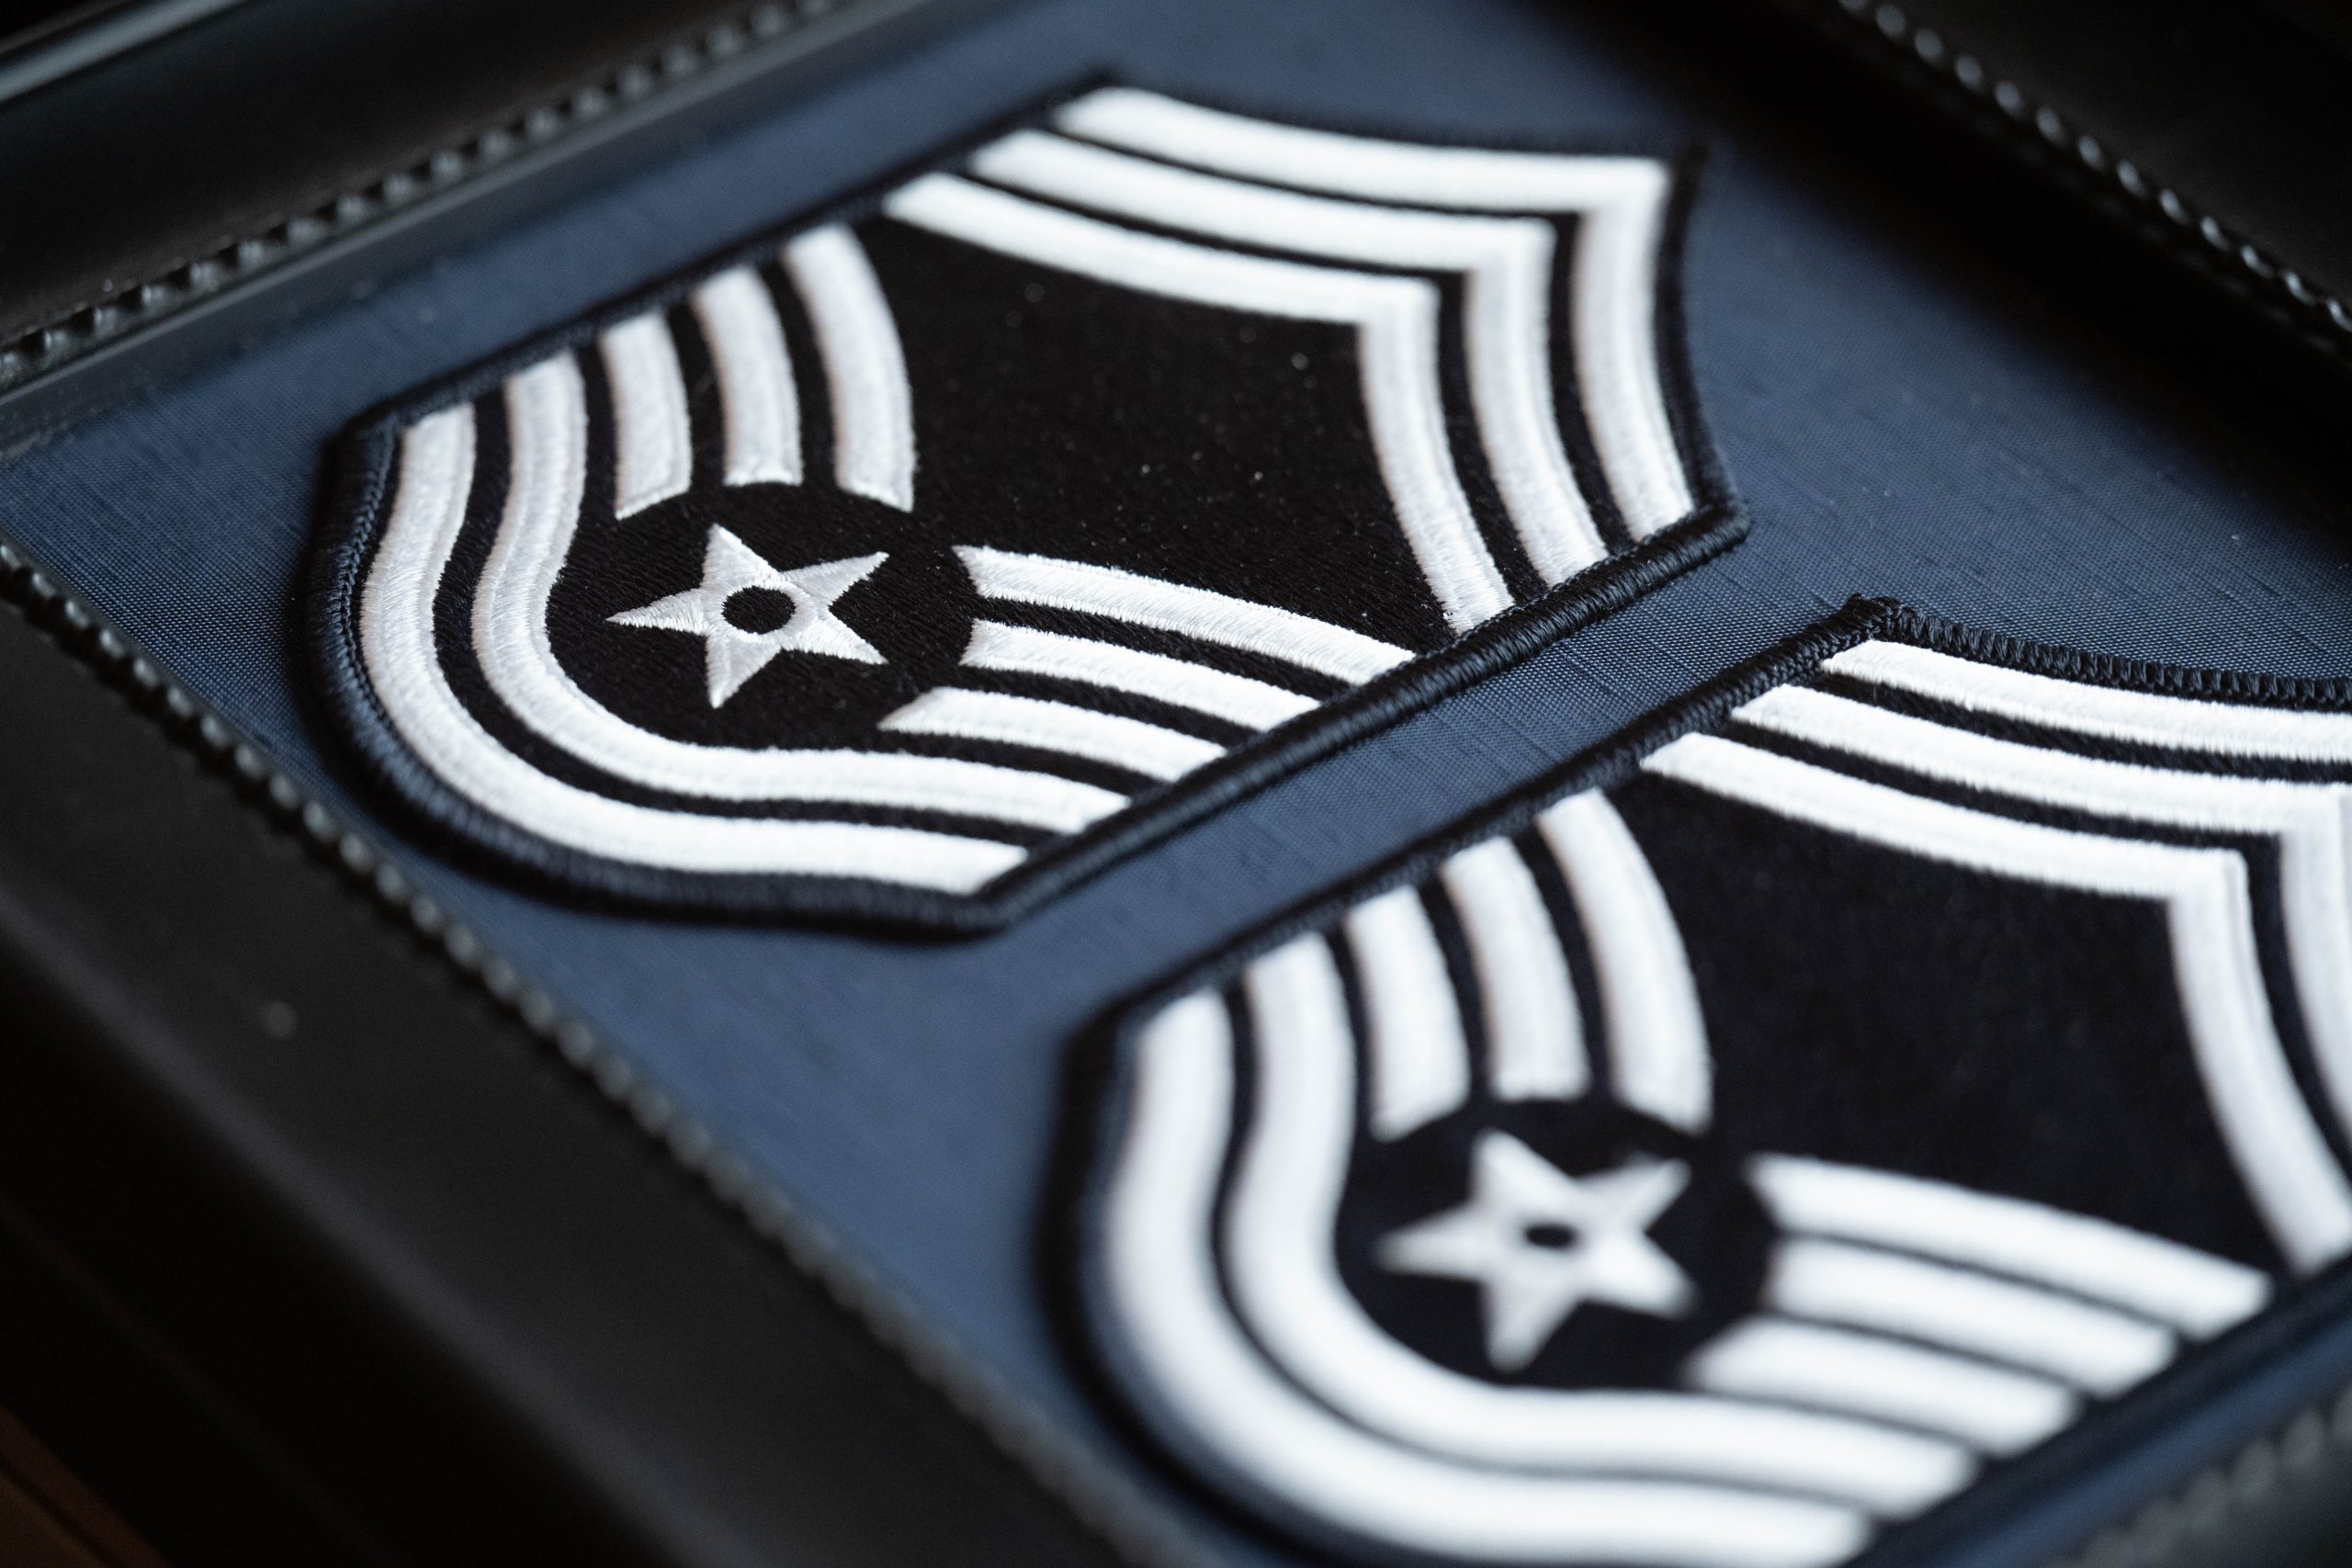 Chief Master Sergeant Promotion Rate Ticks Up to Seven-Year High